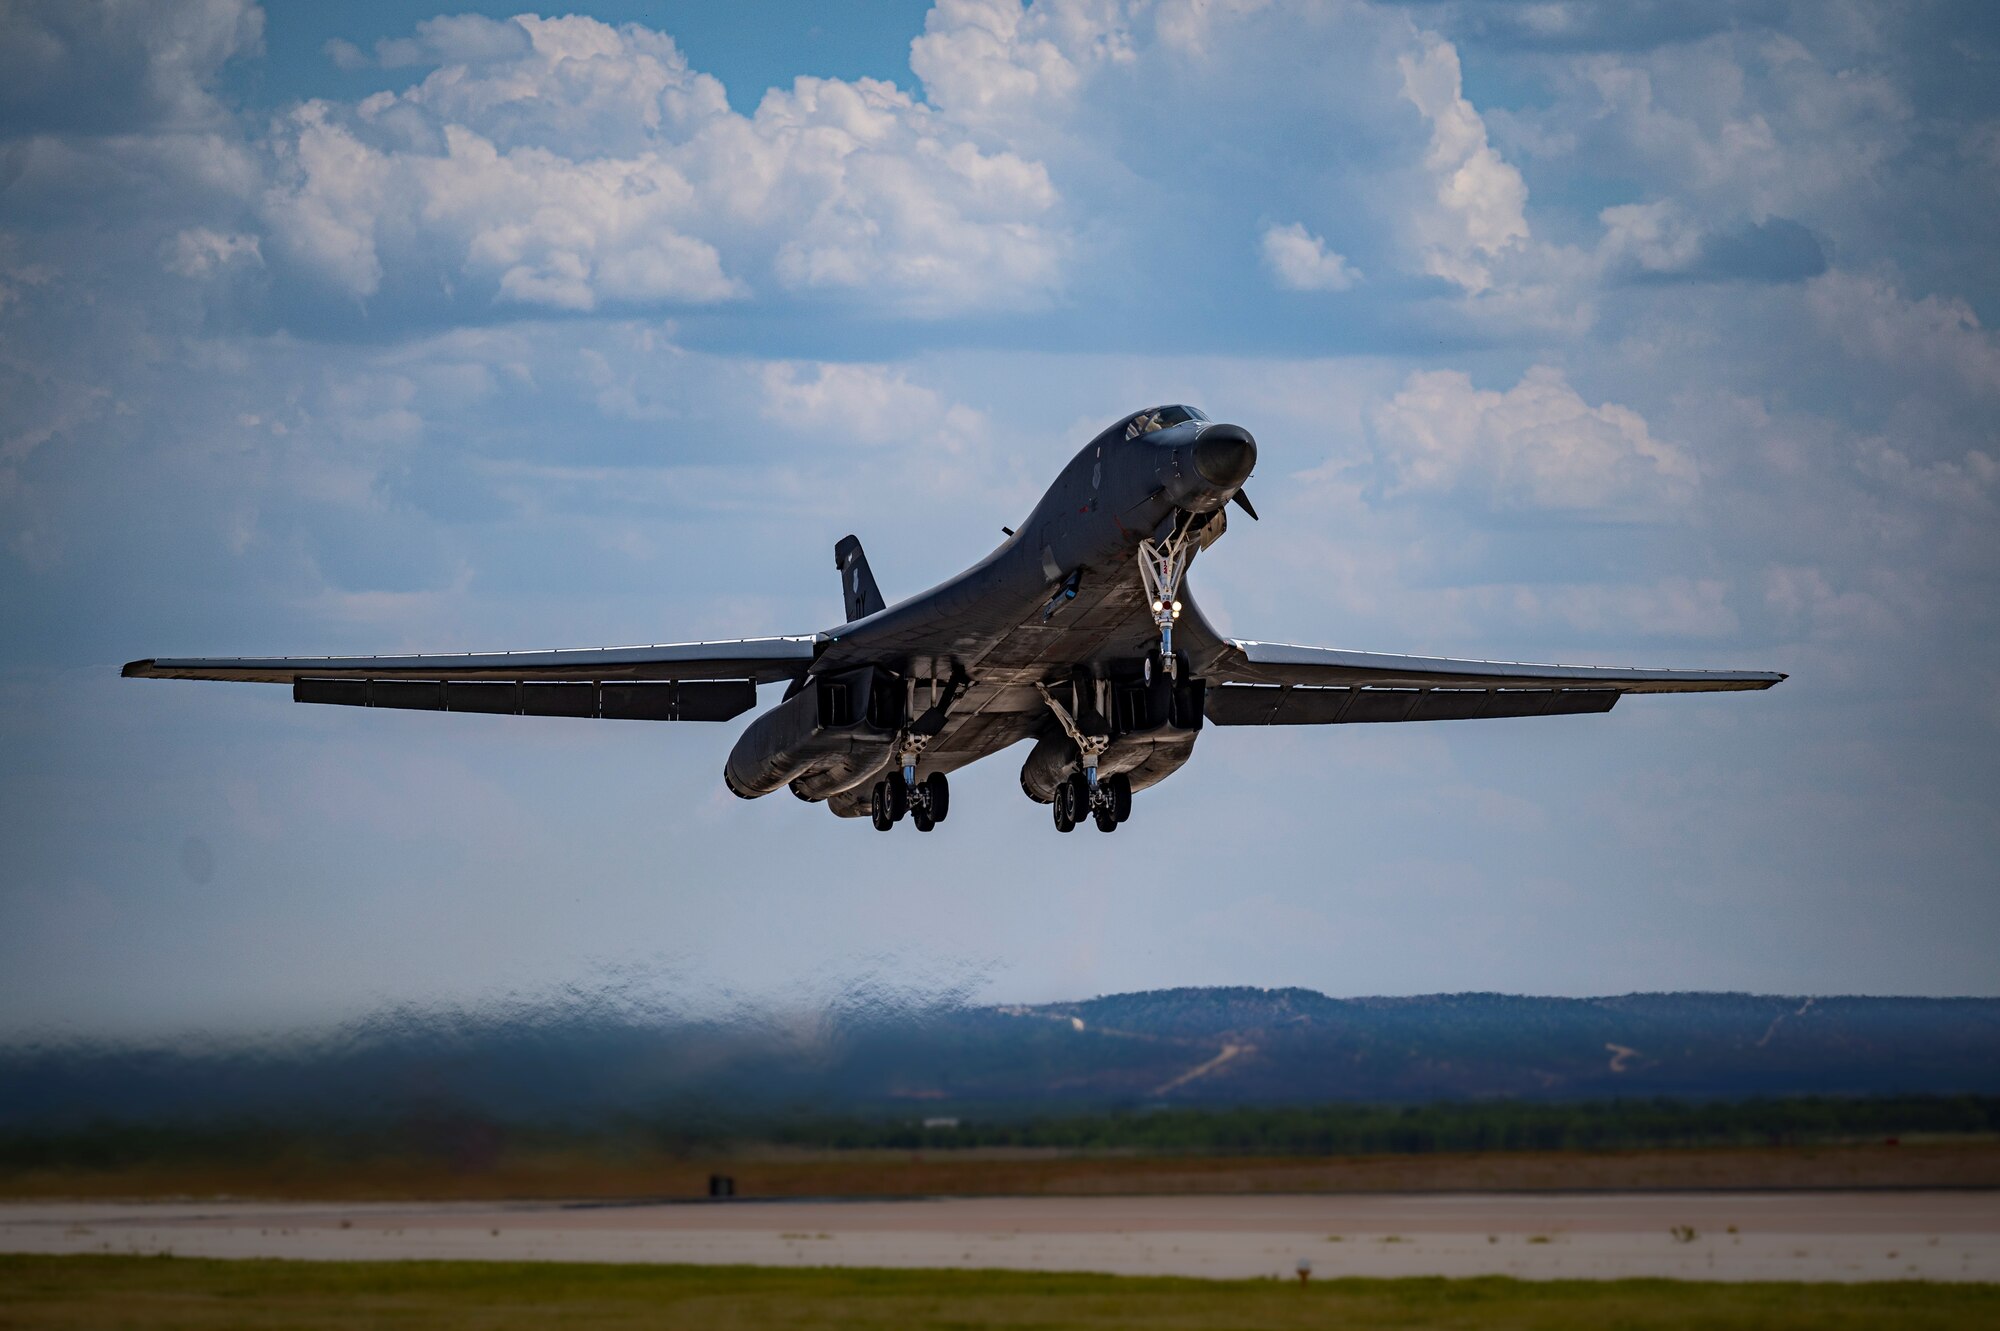 A B-1B Lancer bomber takes off from Dyess Air Force Base, Texas, June 29, 2022 to support Exercise African Lion as well as conduct counter-illicit maritime activity with Mauritanian Navy vessels off the coast of Mauritania. Supporting Bomber Task Force Conus-to-Conus missions enhance bomber aviators' abilities and build relationships and interoperability with partner nations. (U.S. Air Force photo by Senior Airman Colin Hollowell)